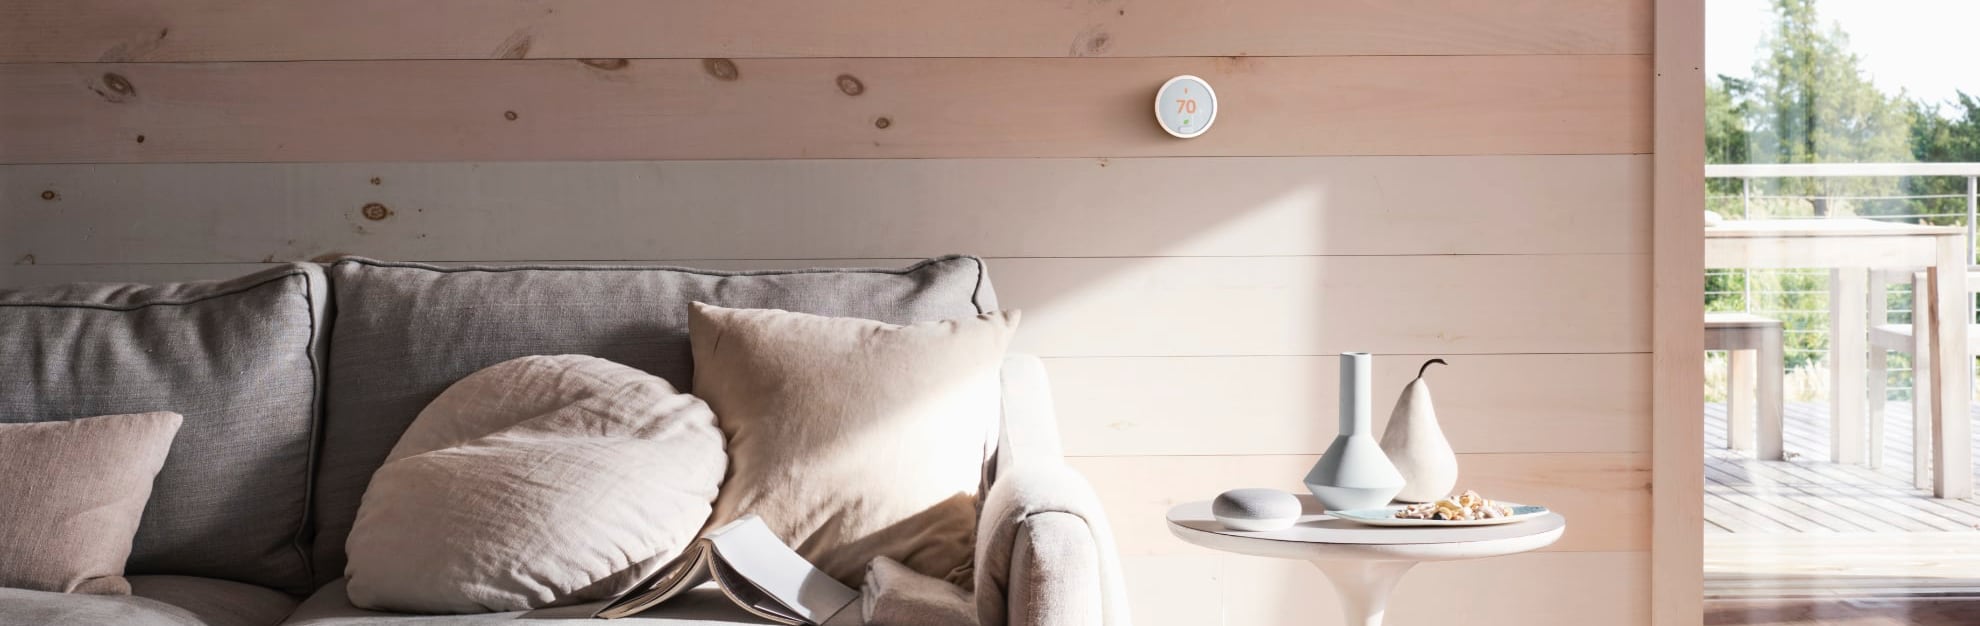 Vivint Home Automation in Long Beach